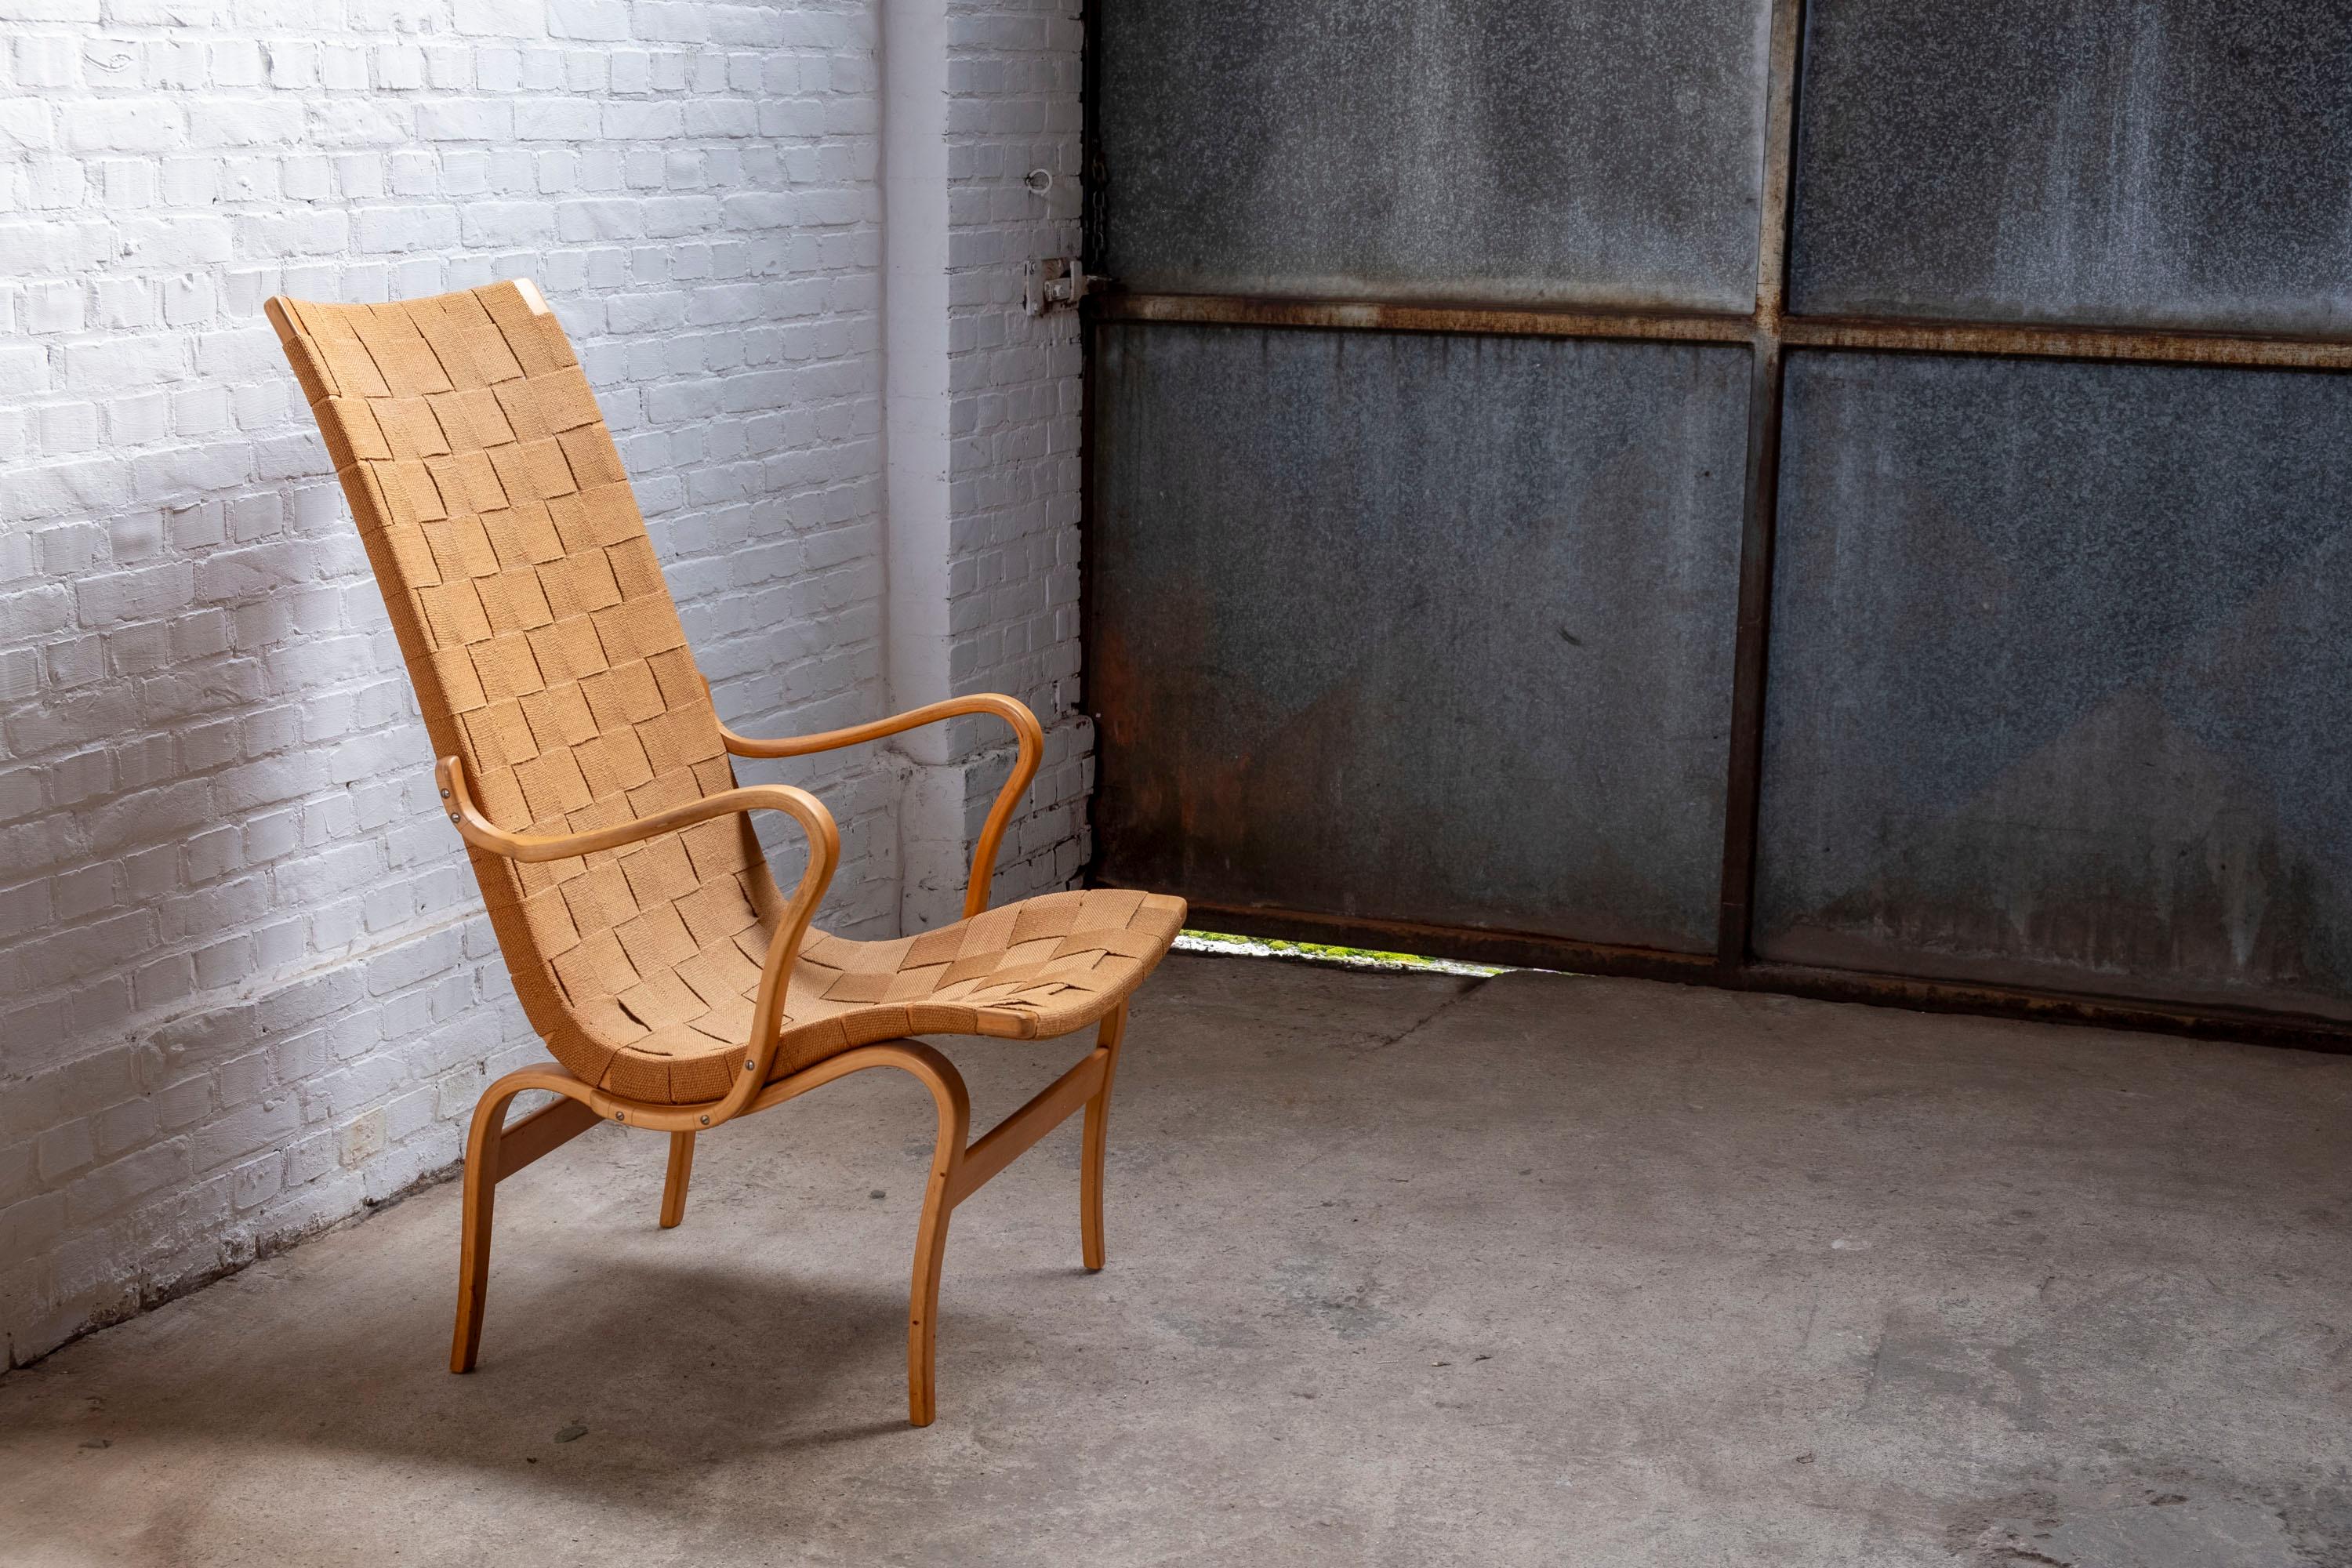 Rare high back Eva lounge chair designed by Bruno Mathsson in 1941.
This example is an amazingly well kept example of the first edition of this chair and is produced in the first year of production; 1941 by Karl Mathsson in Värnamo, Sweden.
The